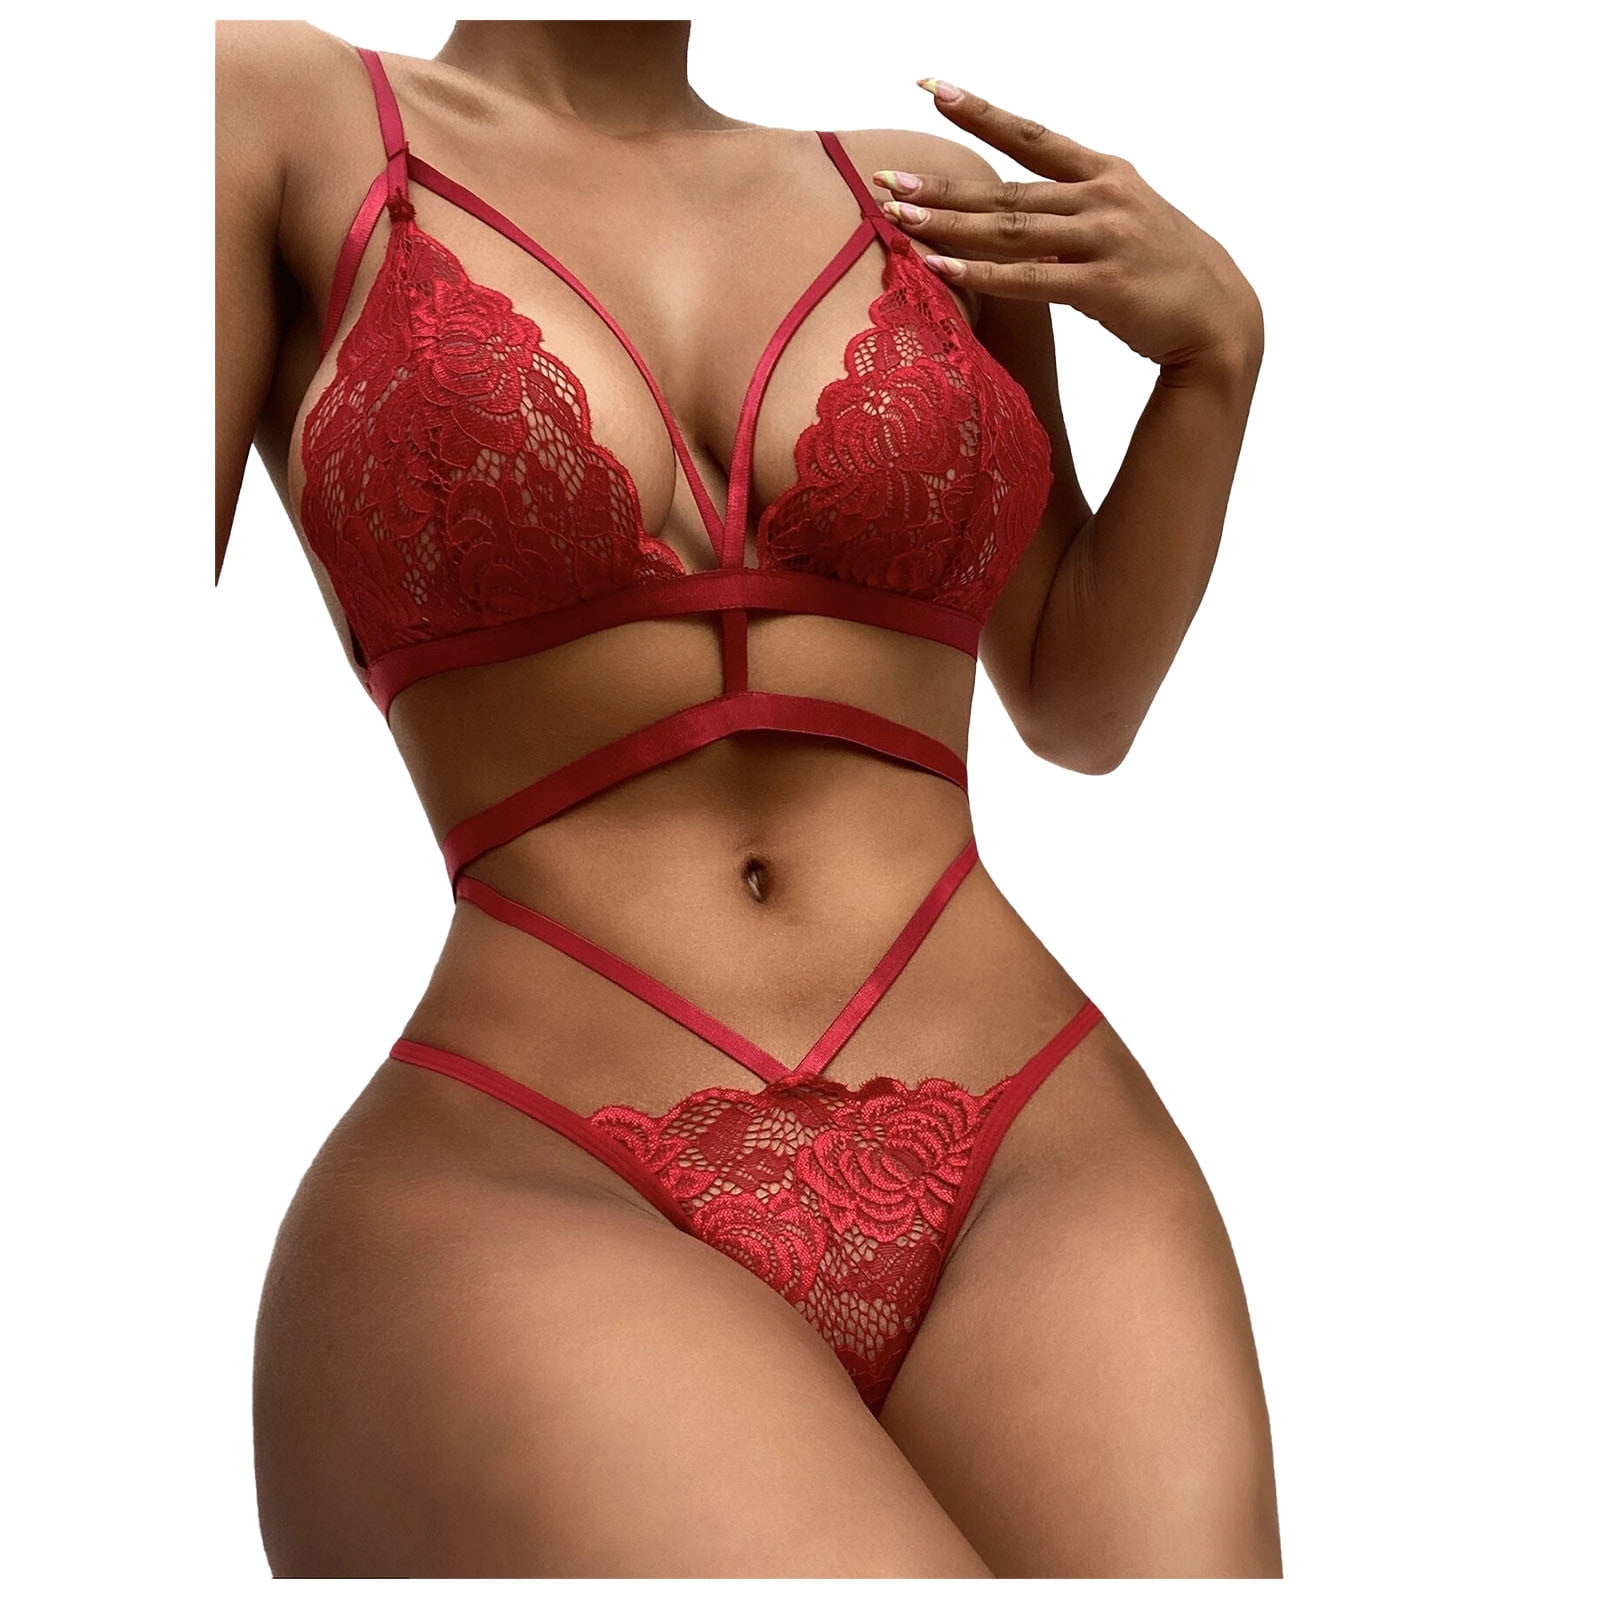 GuessLookry 2023 Bra And Panty Sets For Women Sexy Women Lingerie Lace Hollow Out Temptation Babydoll Underwear Panties Underpants Sleepwear Briefs Suit New Year Gift image